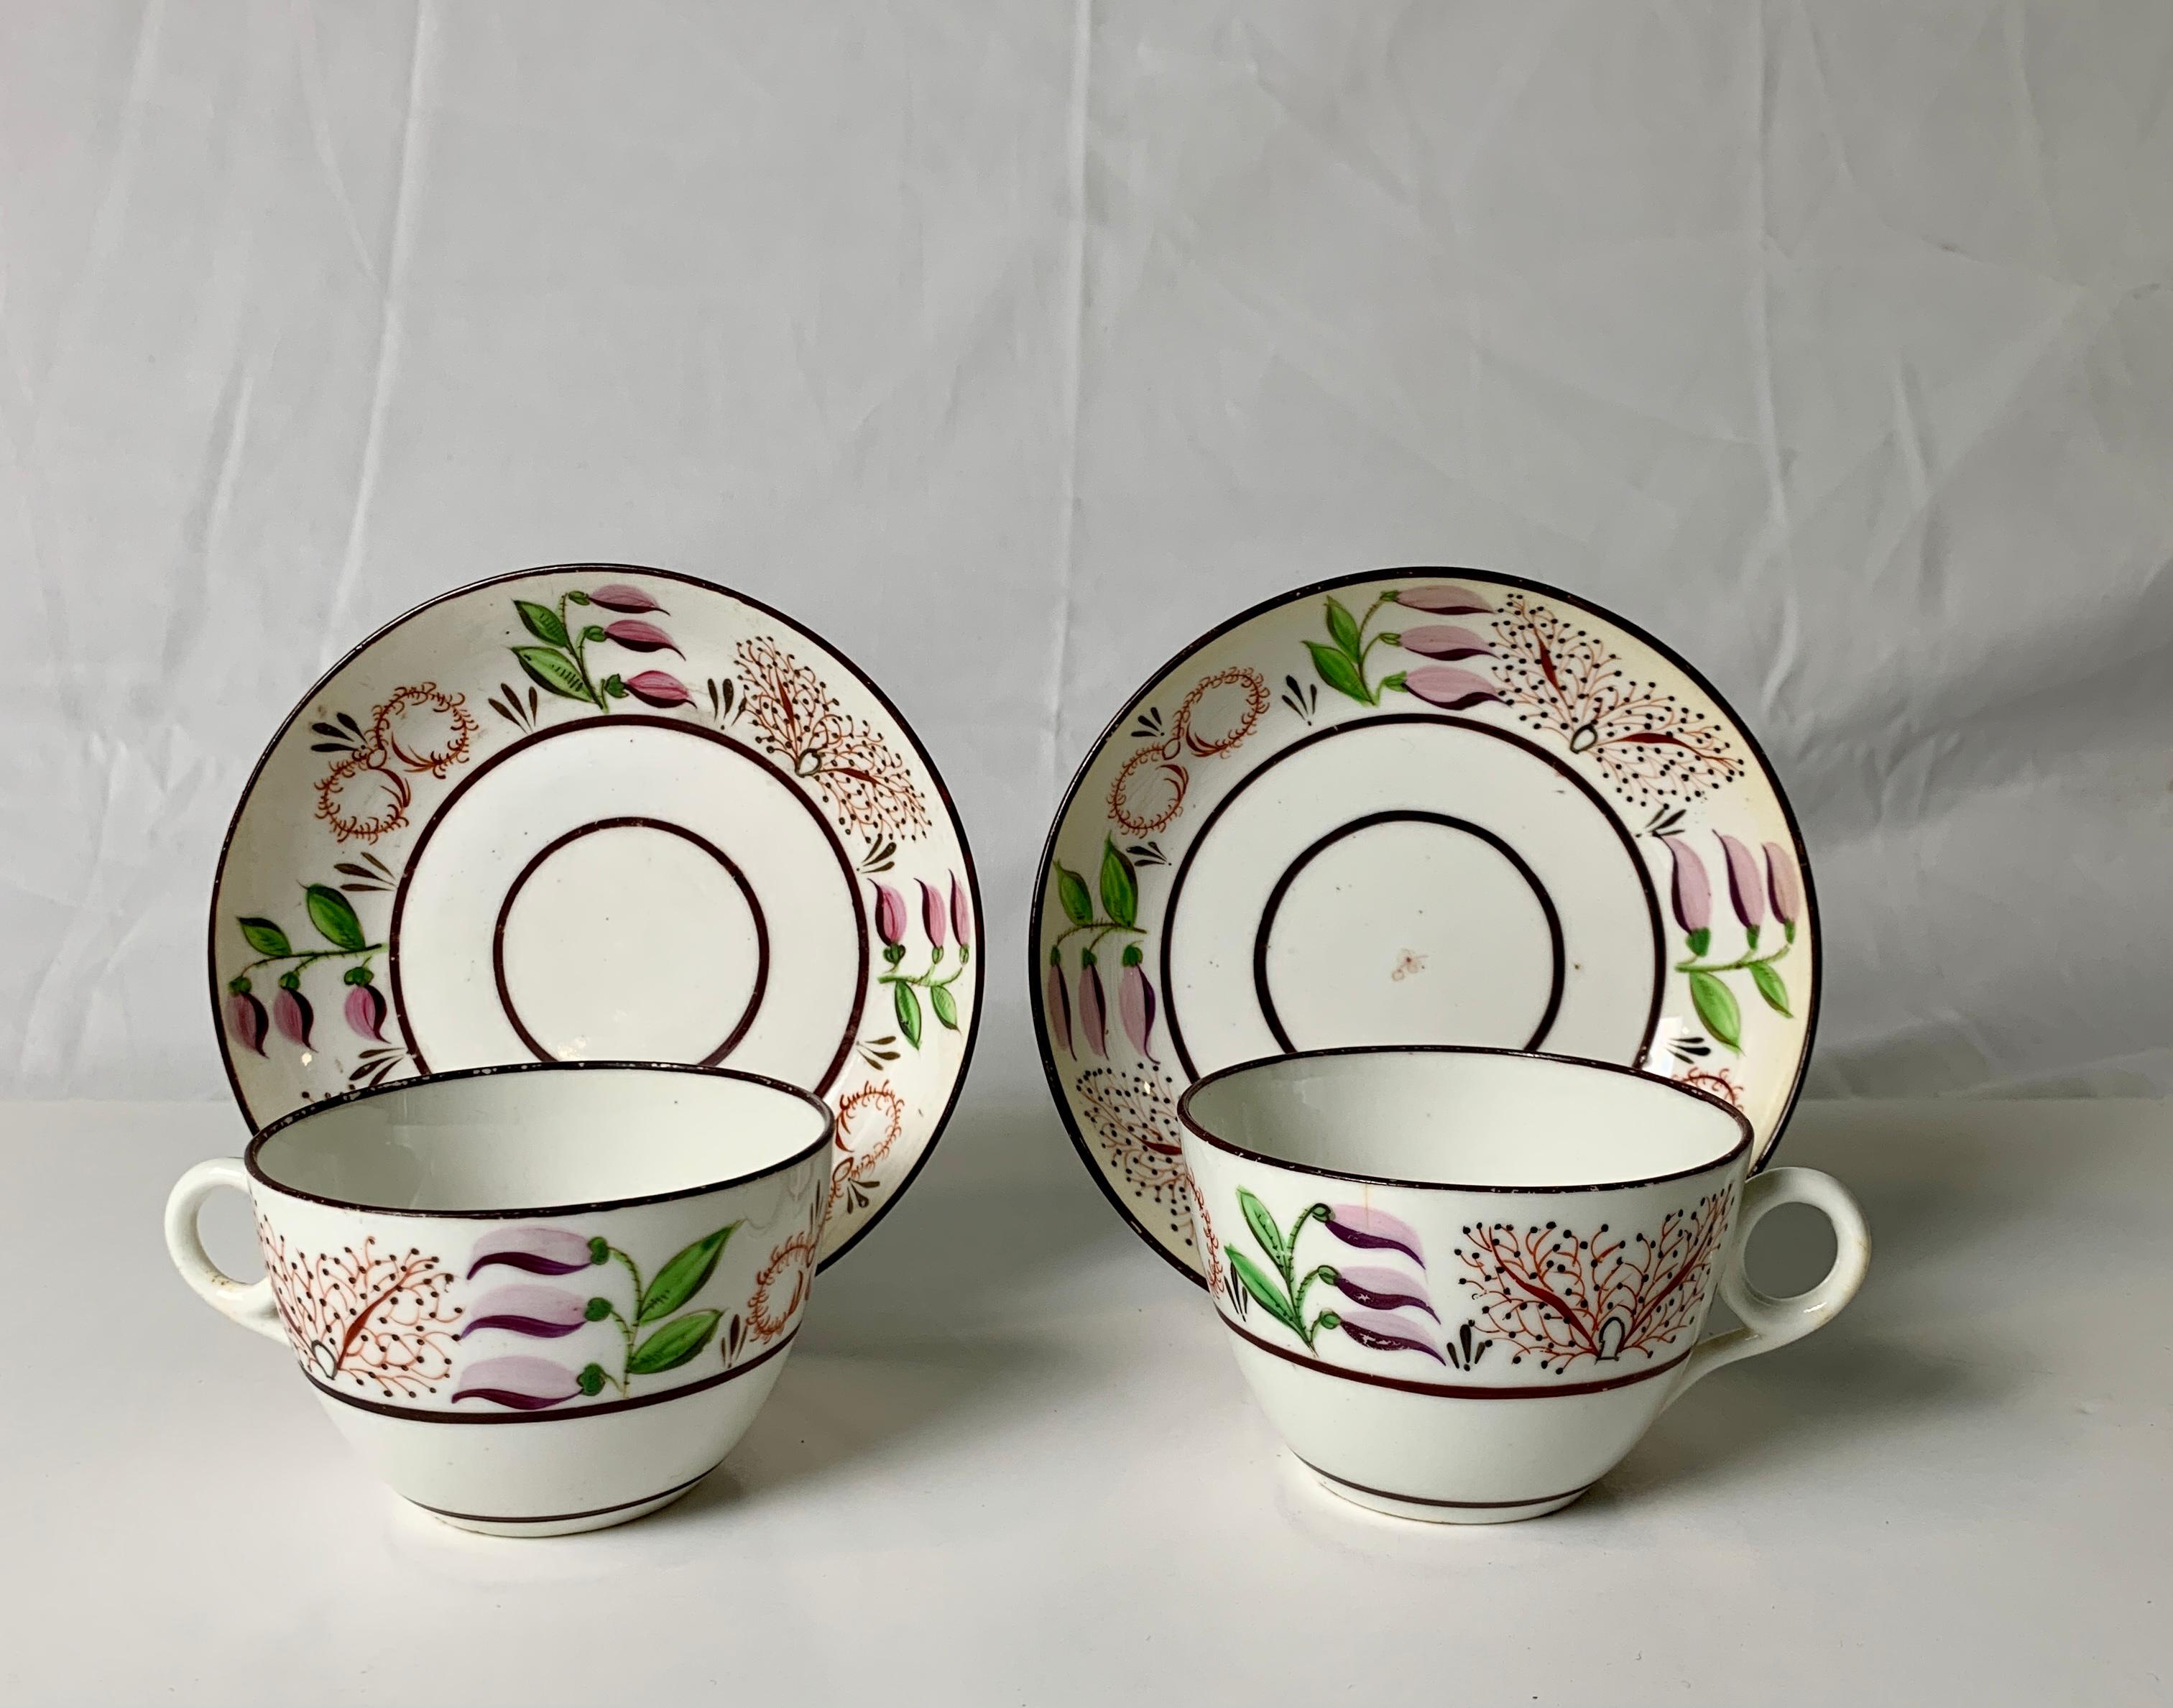 Country Collection of Mario Buatta a Pair of Porcelain Cups Made in England, circa 1825 For Sale